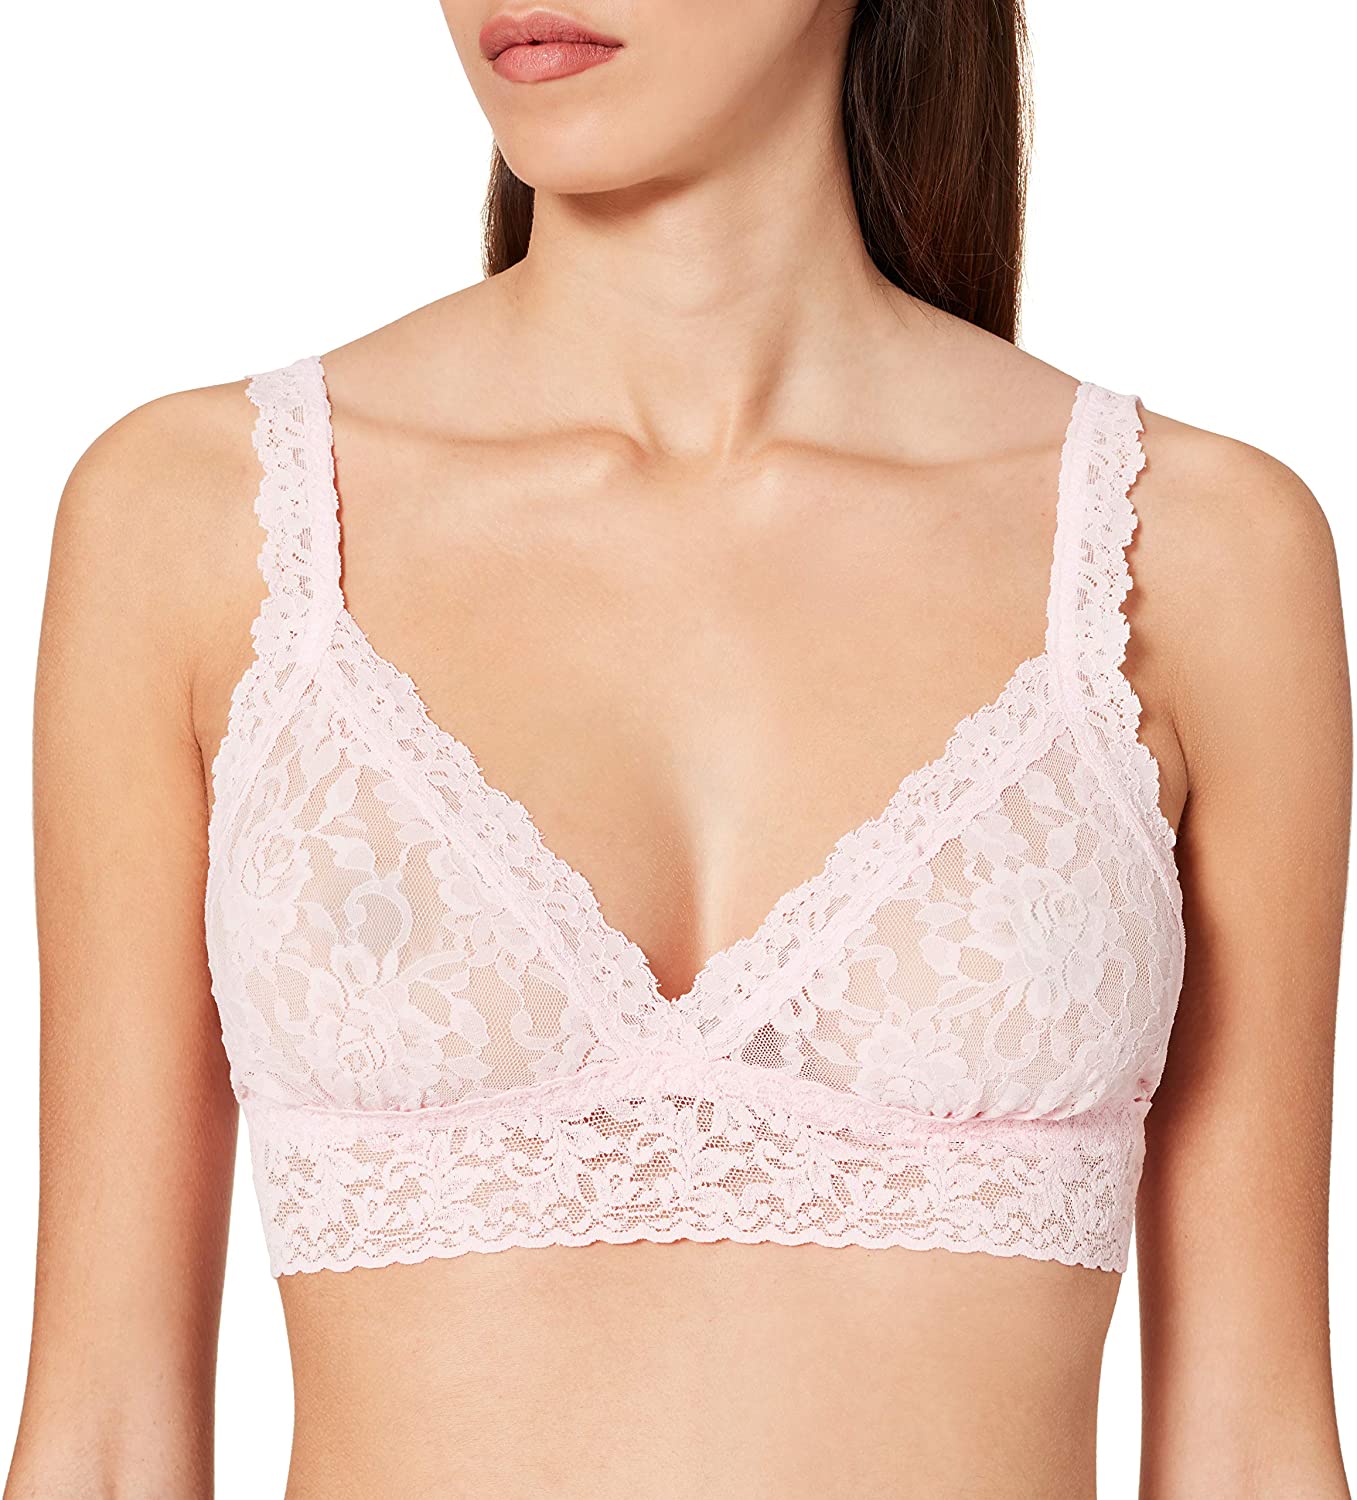 hanky panky Signature Lace Crossover Bralette